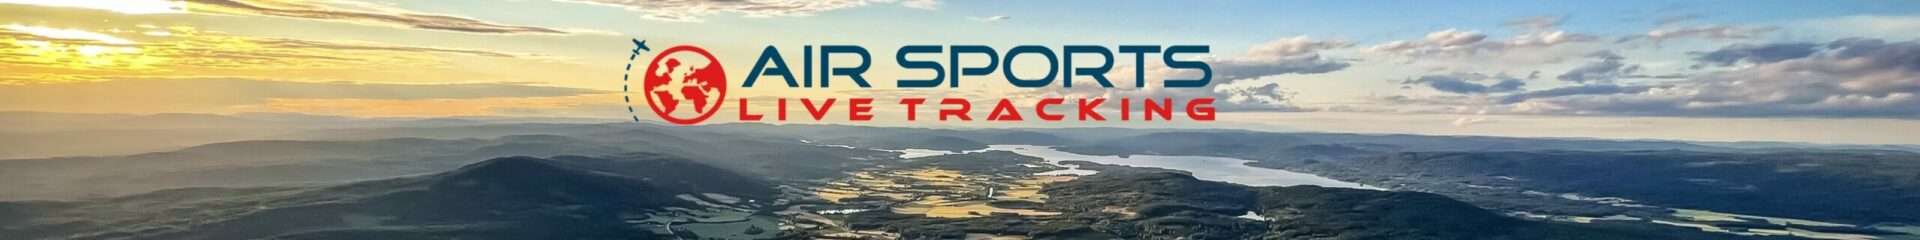 Air Sports Live Tracking